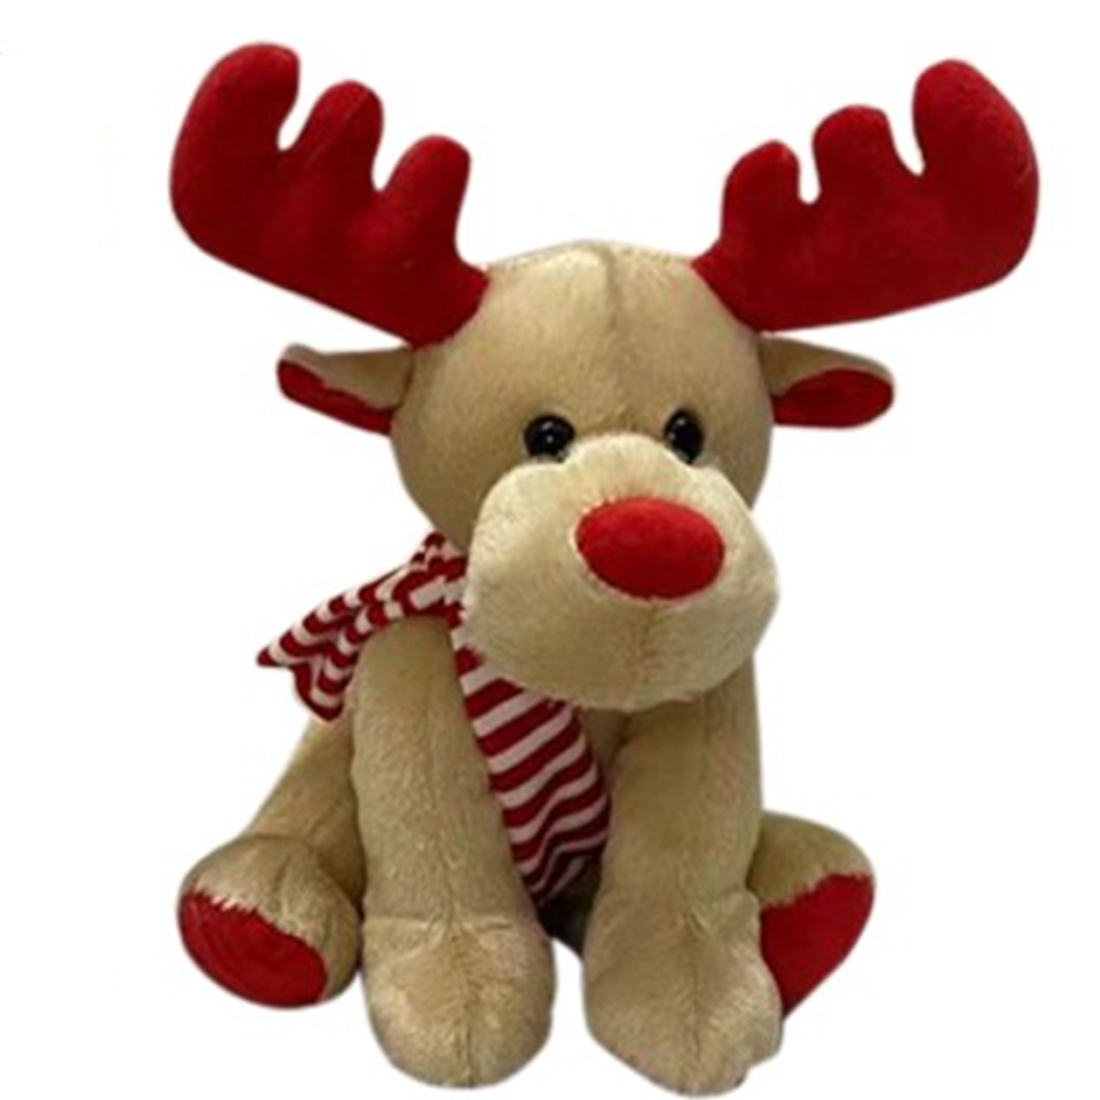 23cm Sitting Plush Reindeer with Red Antlers